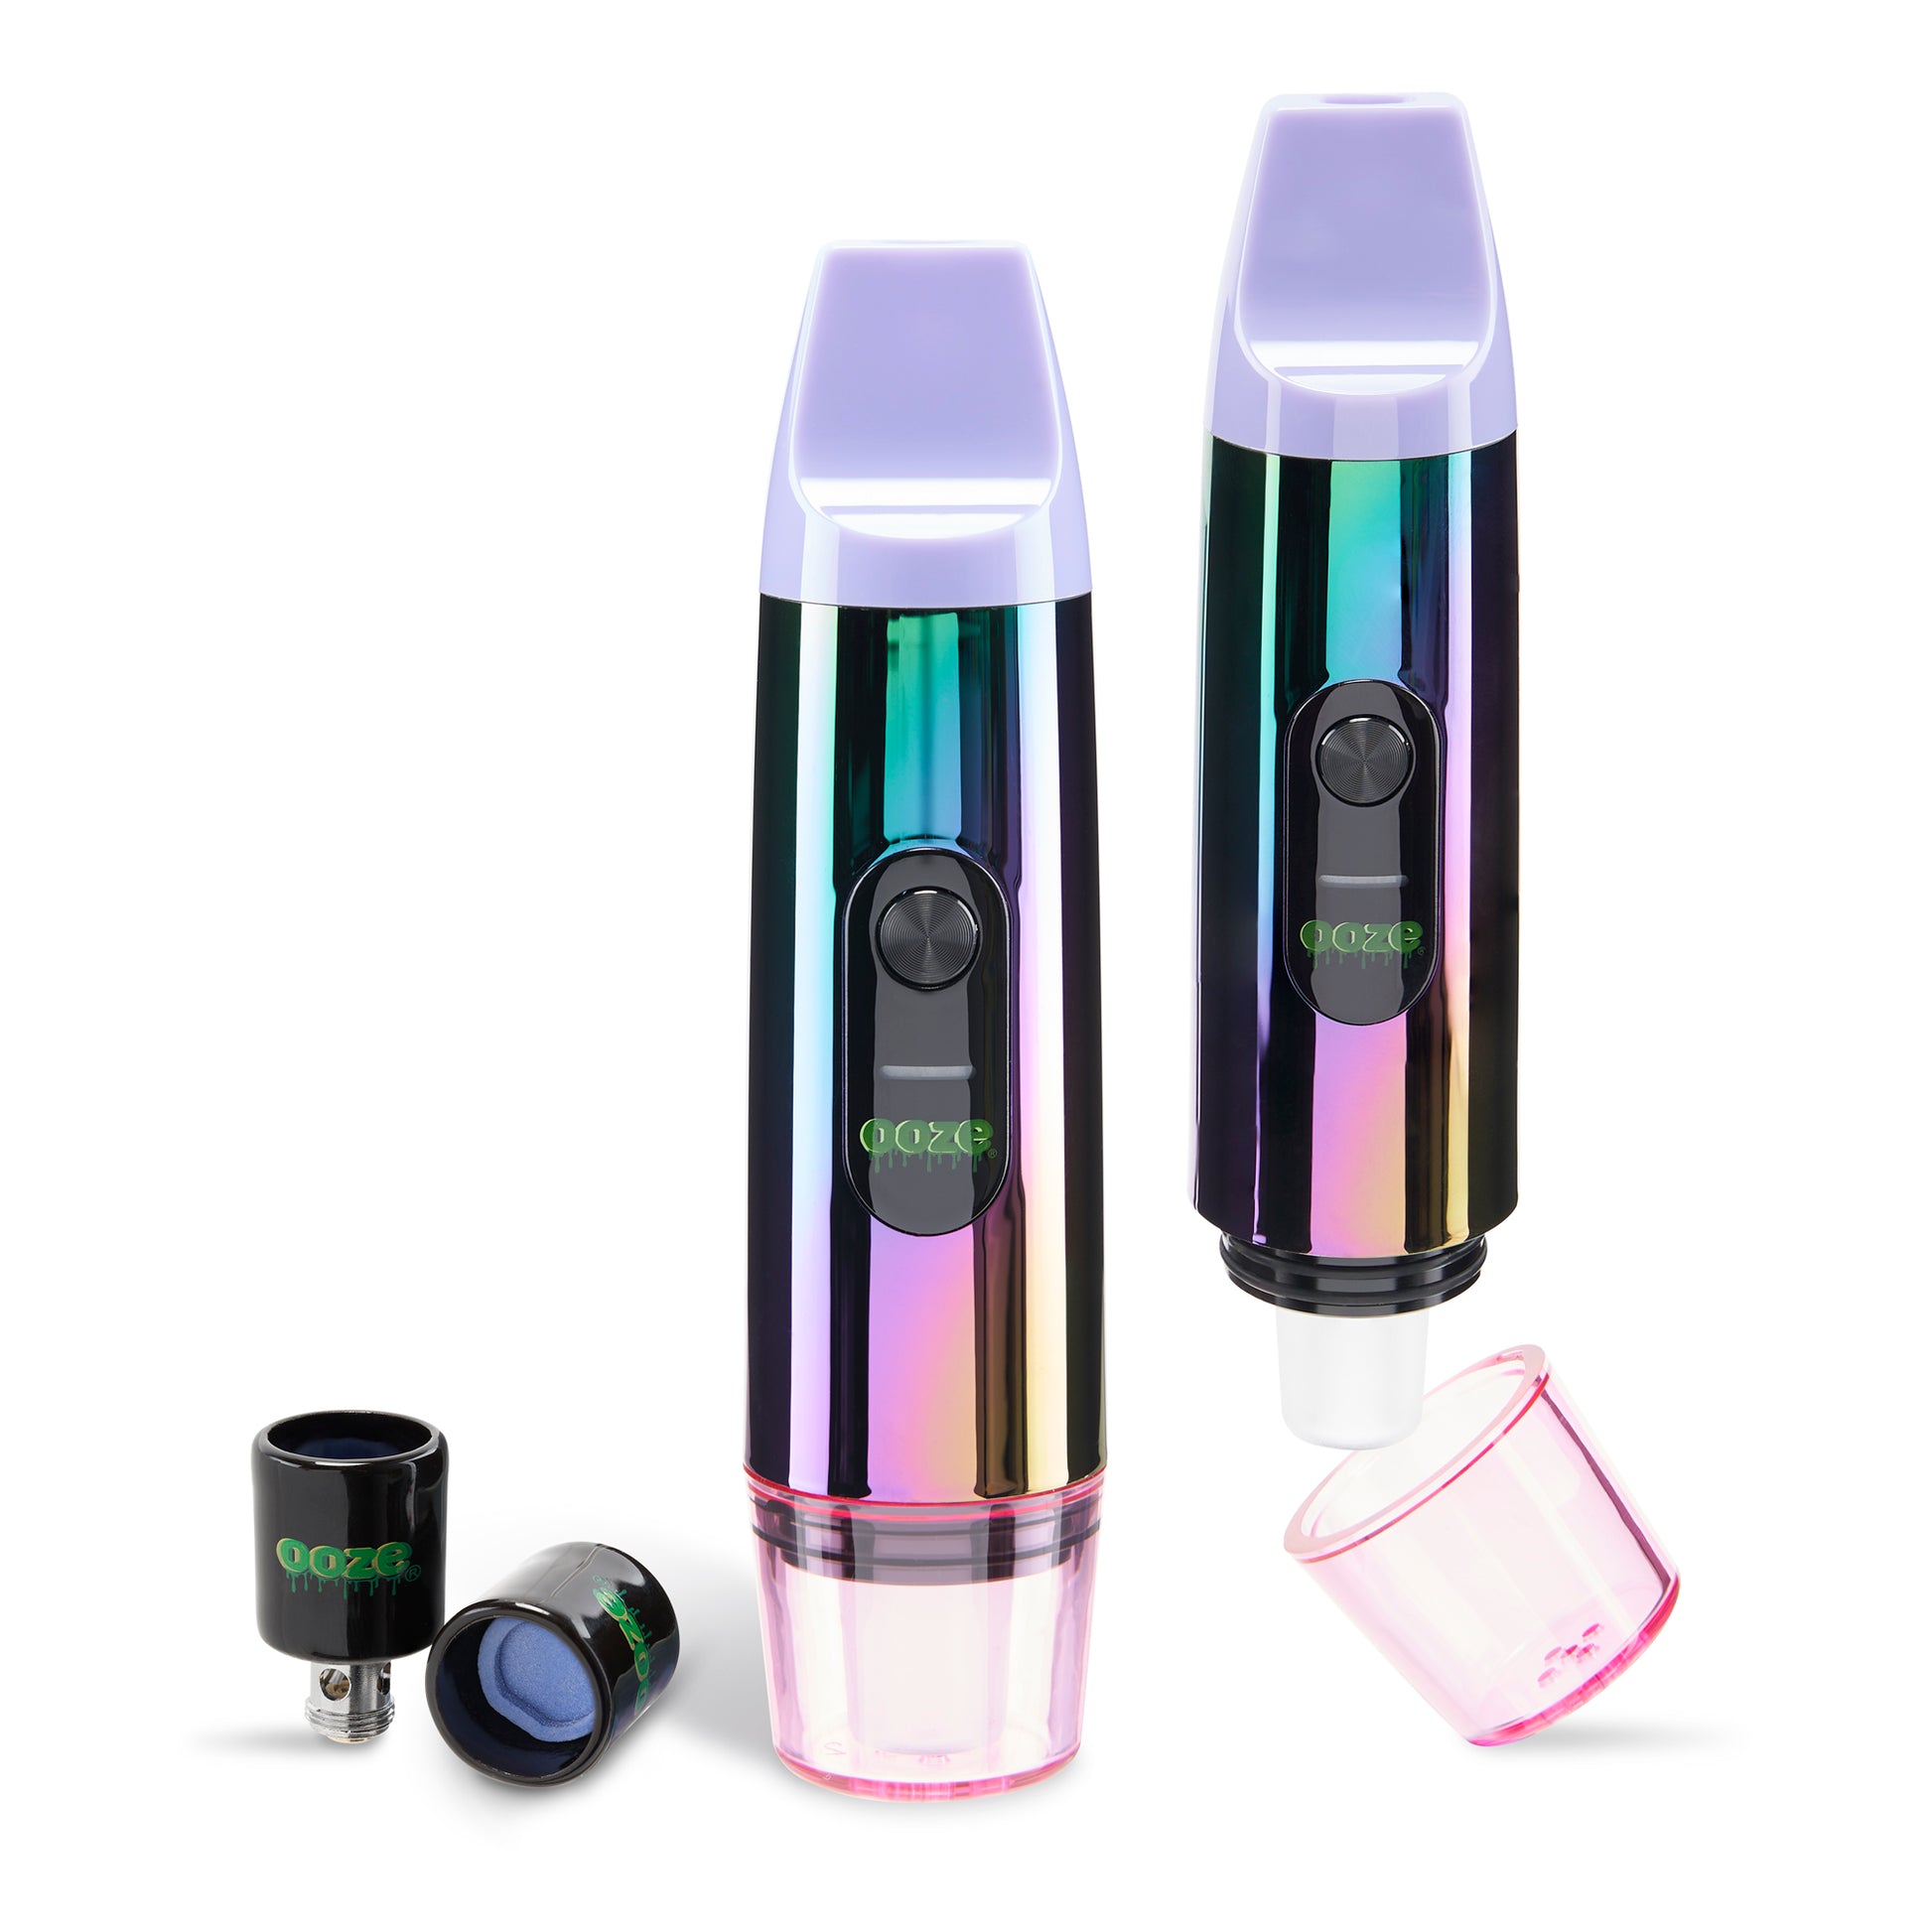 Two Rainbow Ooze Booster Extract Vaporizers are next to each other to show the 2 functions. The left is the handheld vape with 2 Onyx Atomizers to the left. On the right the device is showing the 14mm water pipe adapter with the cap removed.